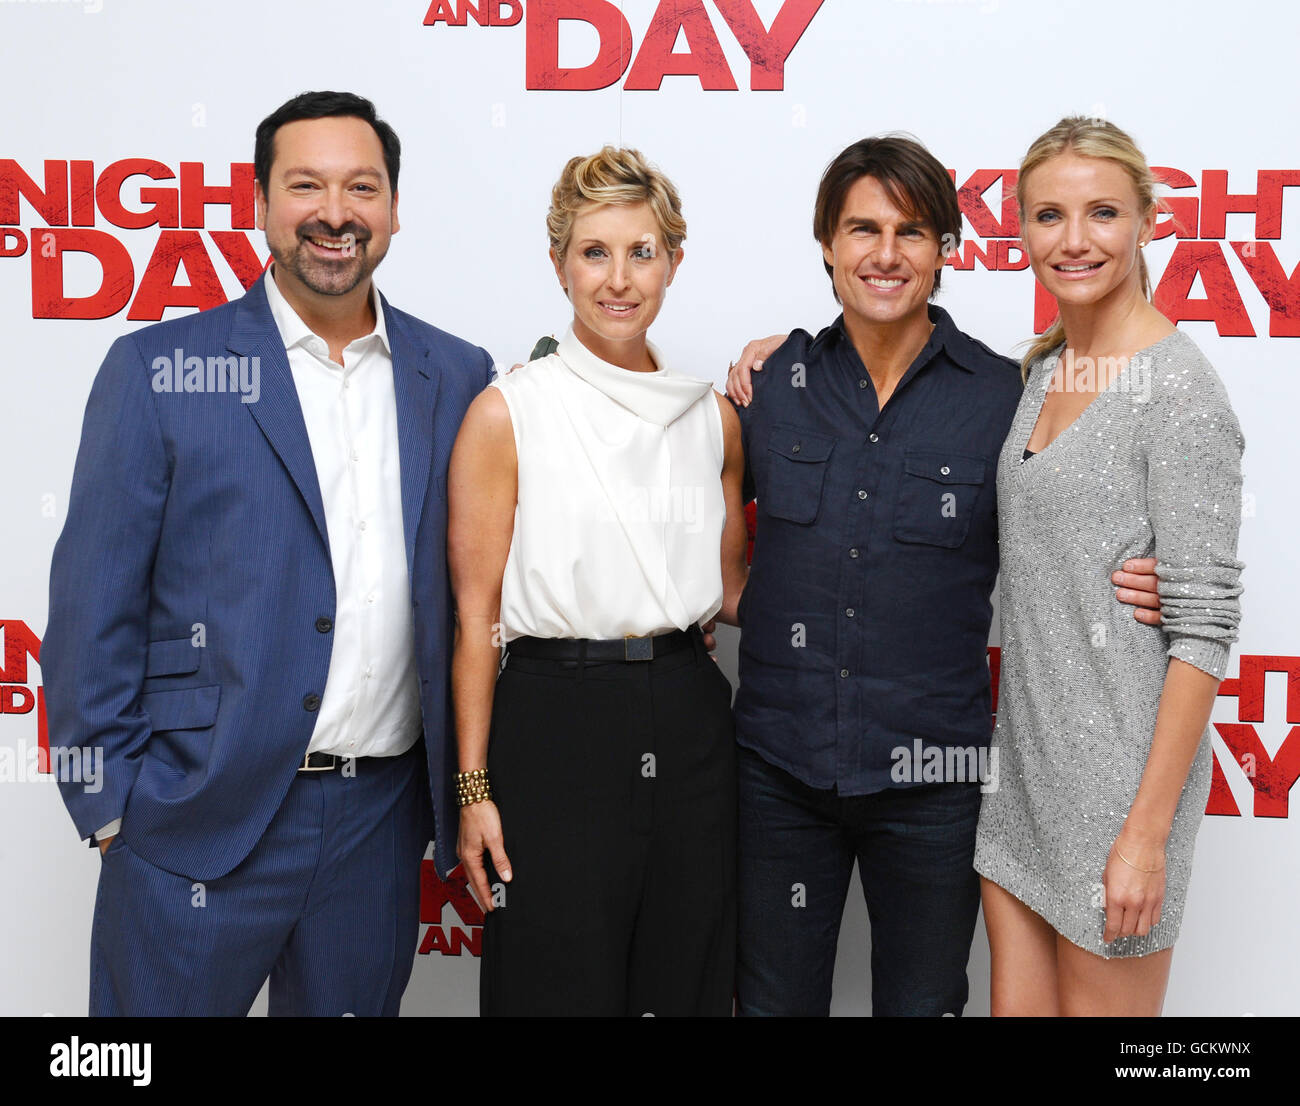 Director James Mangold, Cathy Konrad, Tom Cruise and Cameron Diaz at the UK premier of the film 'Knight and Day' at a cinema in London. PRESS ASSOCIATION Photo Picture date: Thursday July 22, 2010. Photo credit should read: Ian West/PA Wire Stock Photo